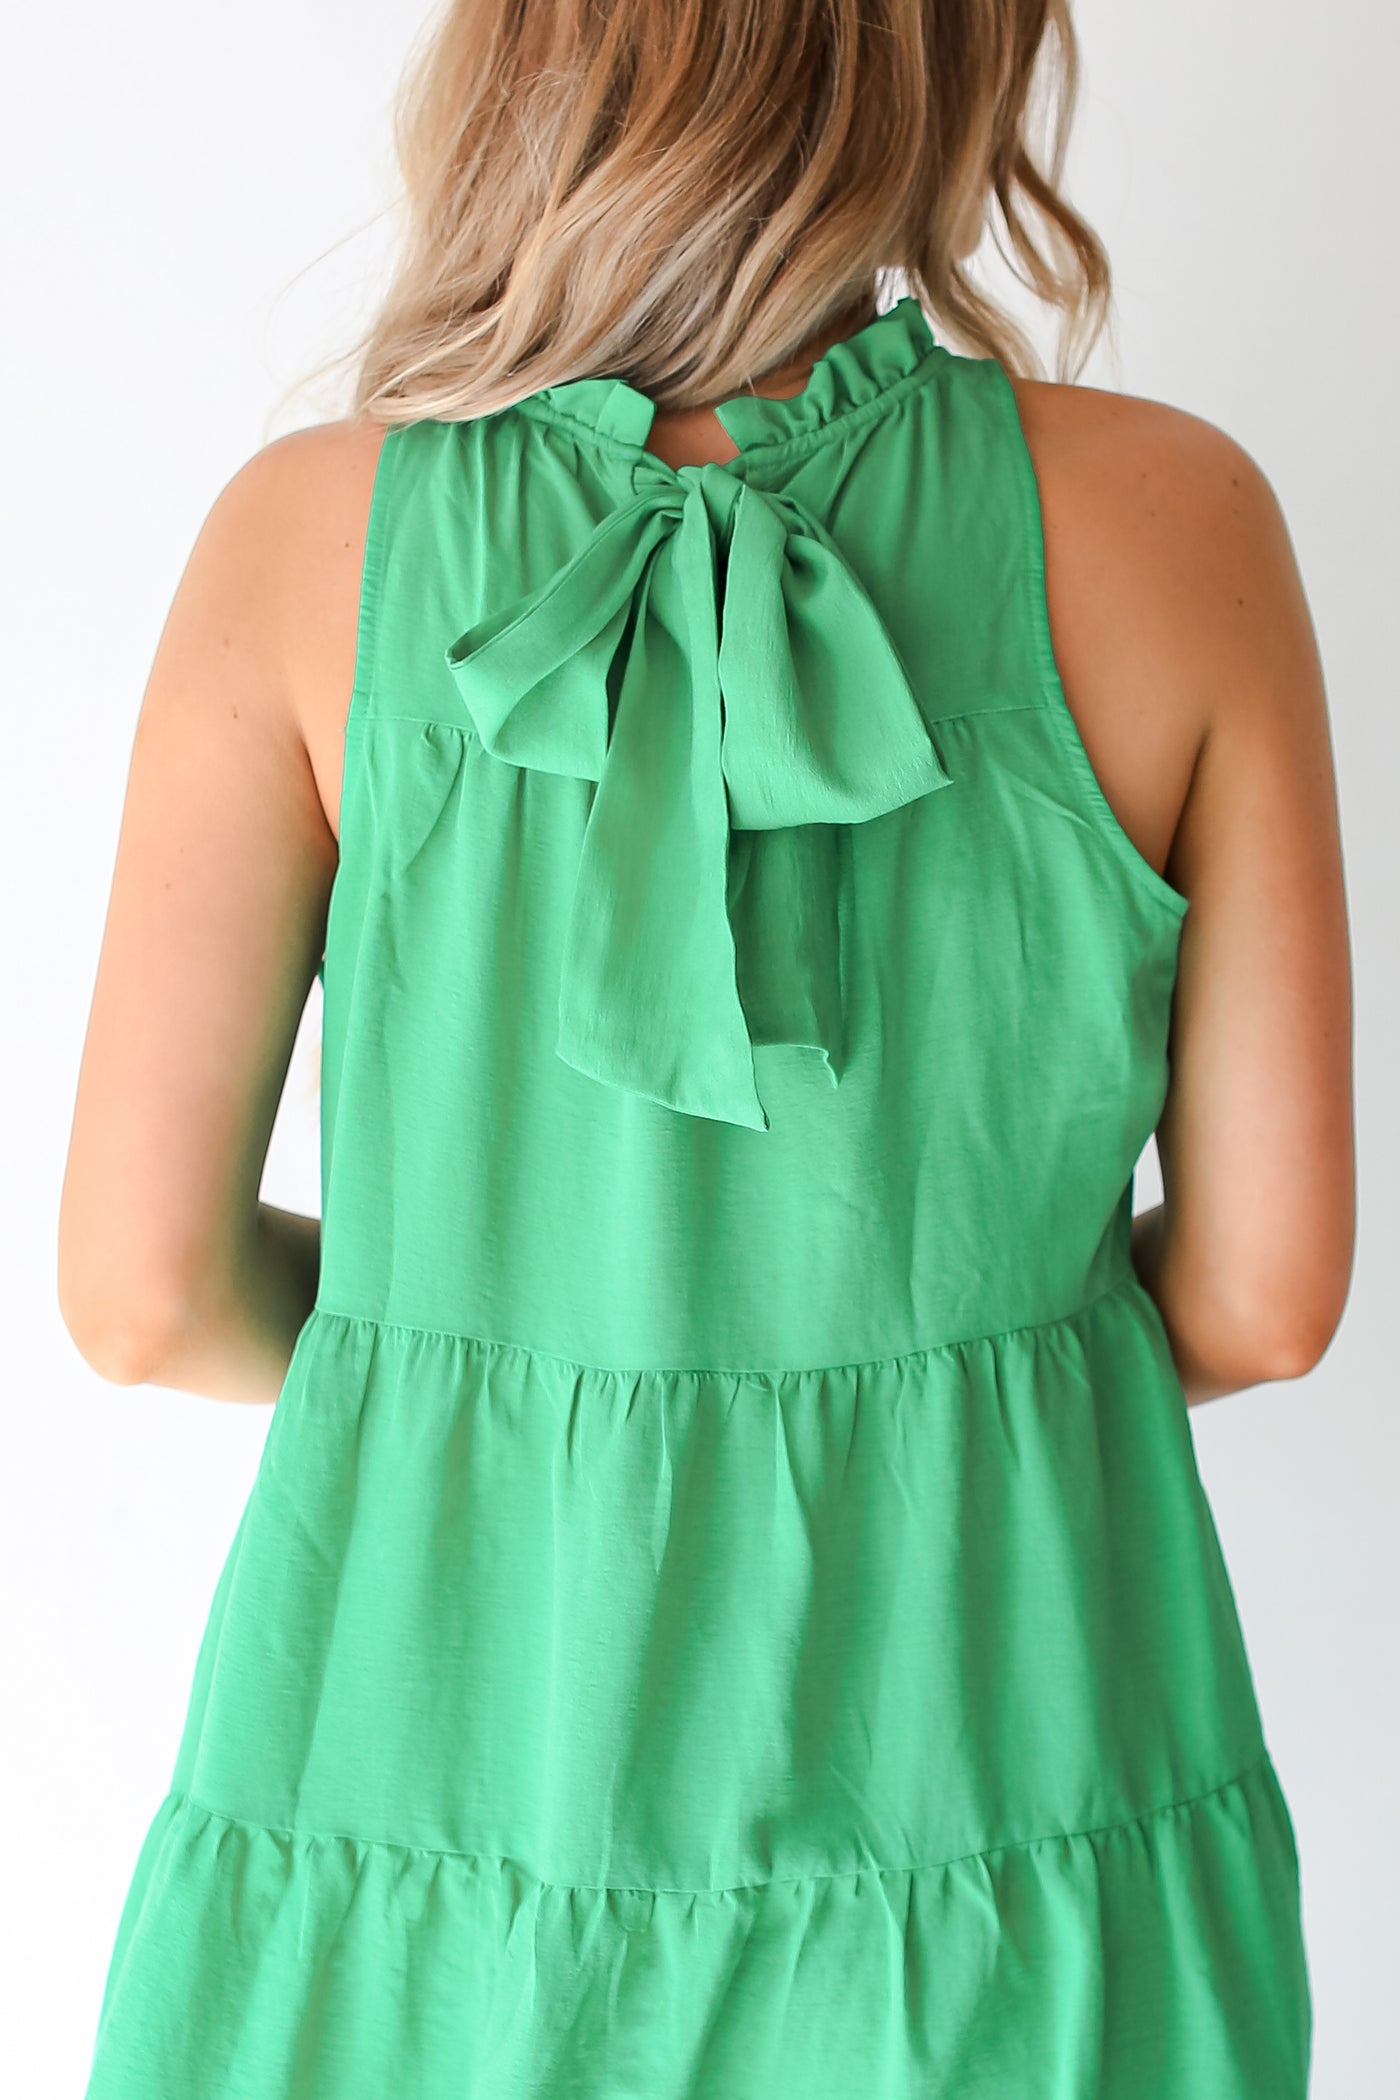 green Tiered Mini Dress back view close up